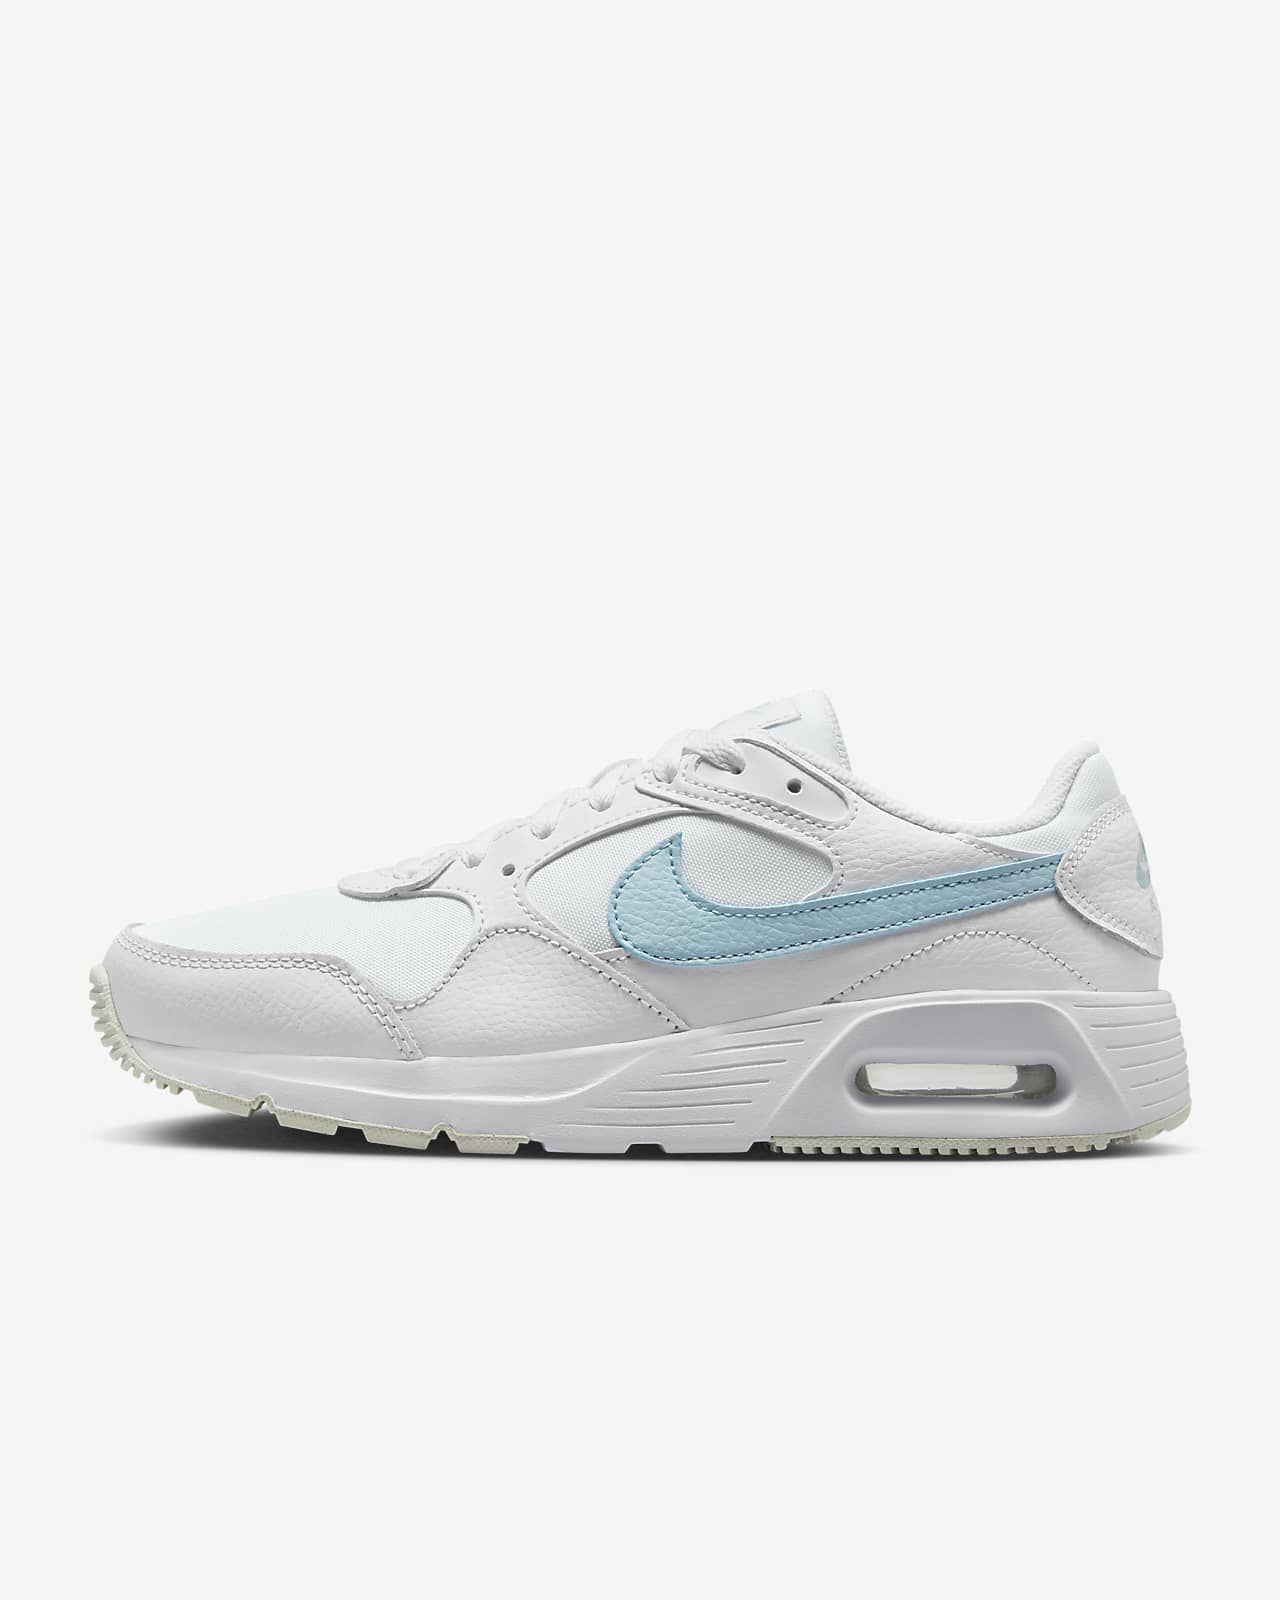 nike women's air max sc shoes stores